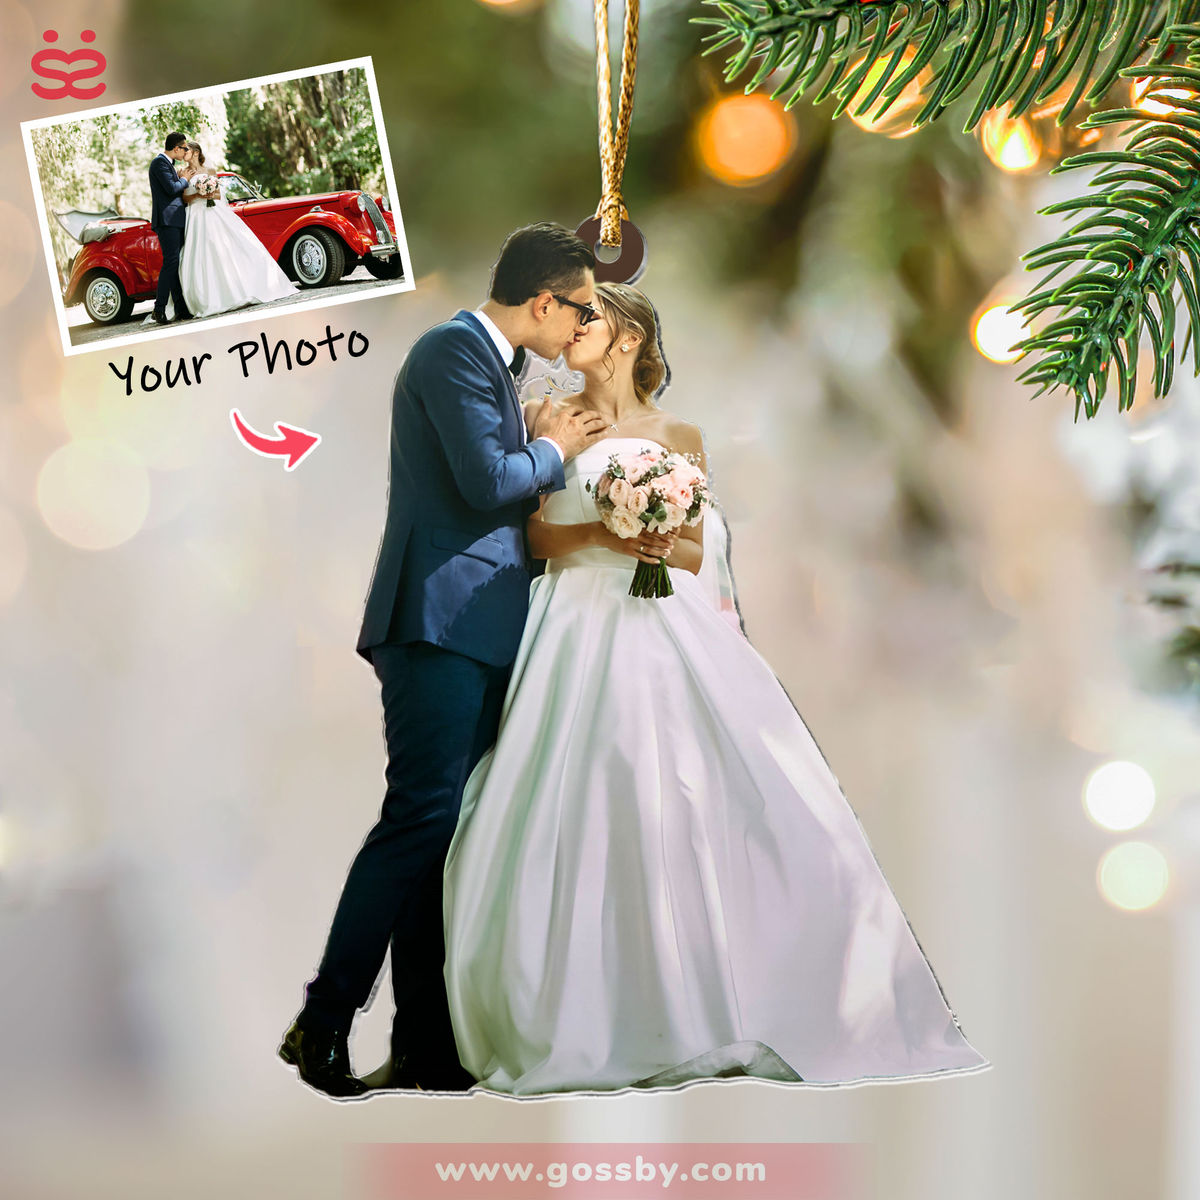 Photo Background Removal - Customized Your Photo Ornaments - Wedding Gift - Gift for Couple - Couple Photo Gifts, Christmas Gifts for Couple